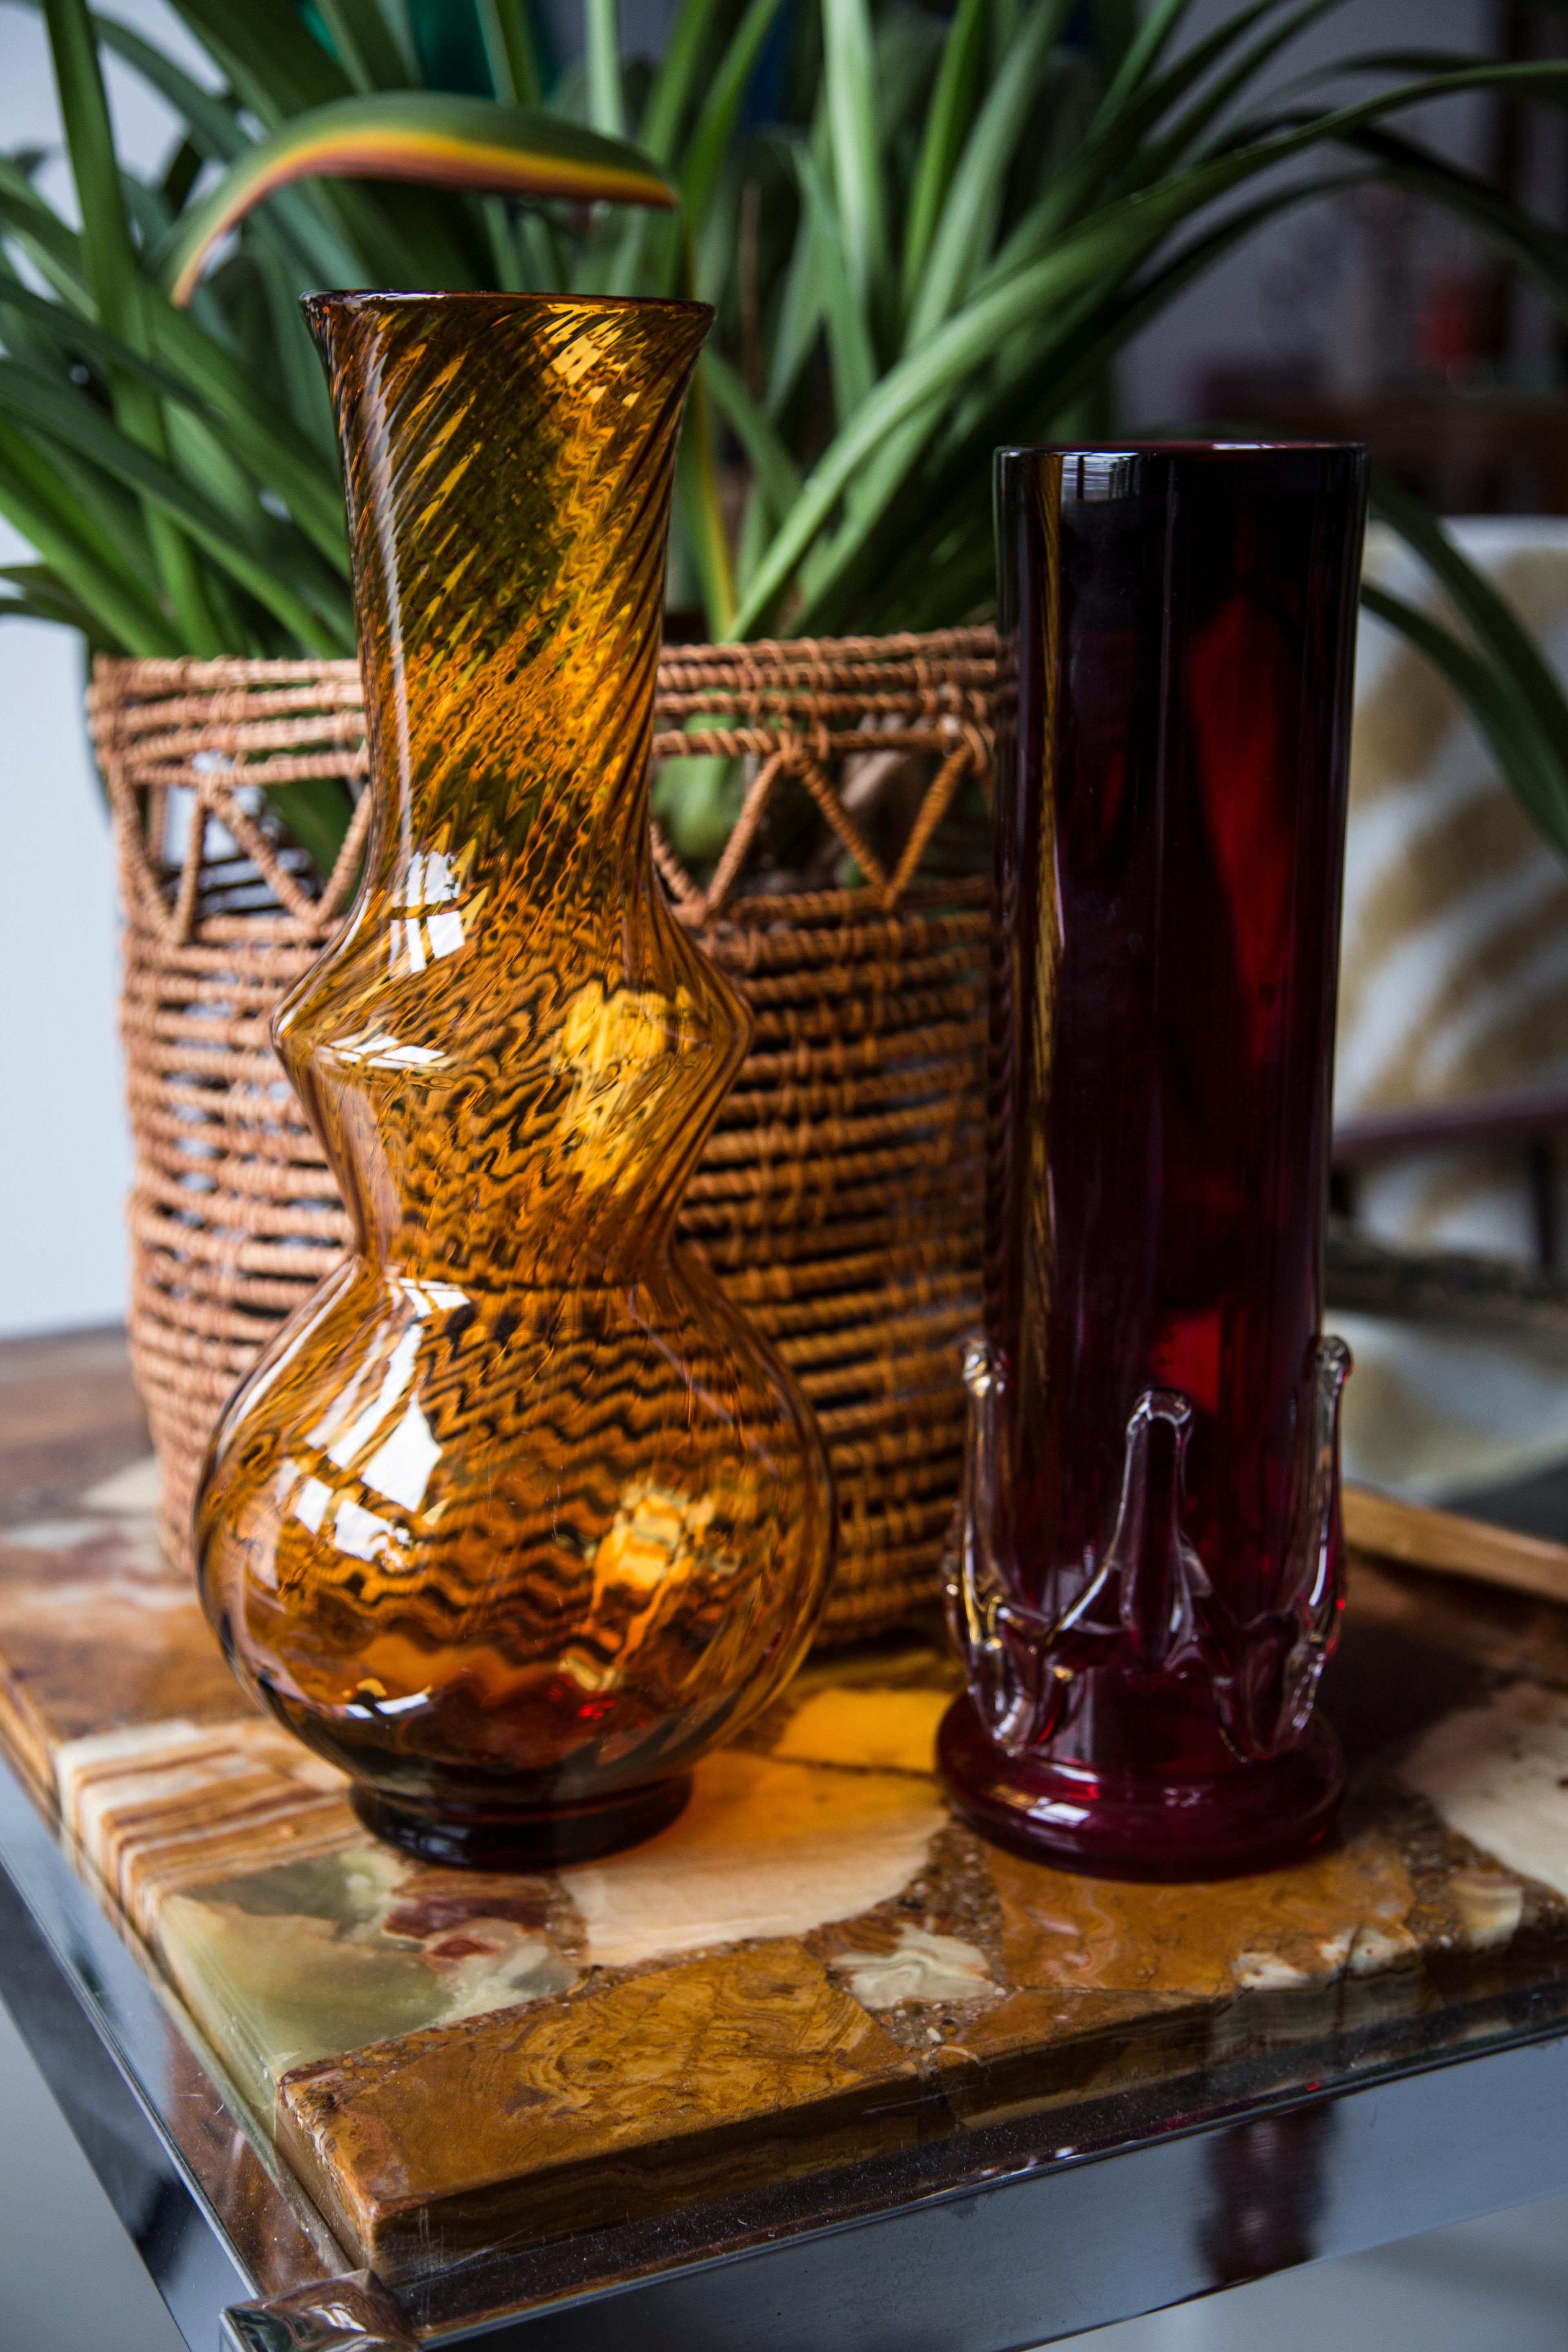 Hand-Carved Mid Century Vintage Artistic Glass Red Vase, Tarnowiec, Sulczan, Europe, 1970s For Sale